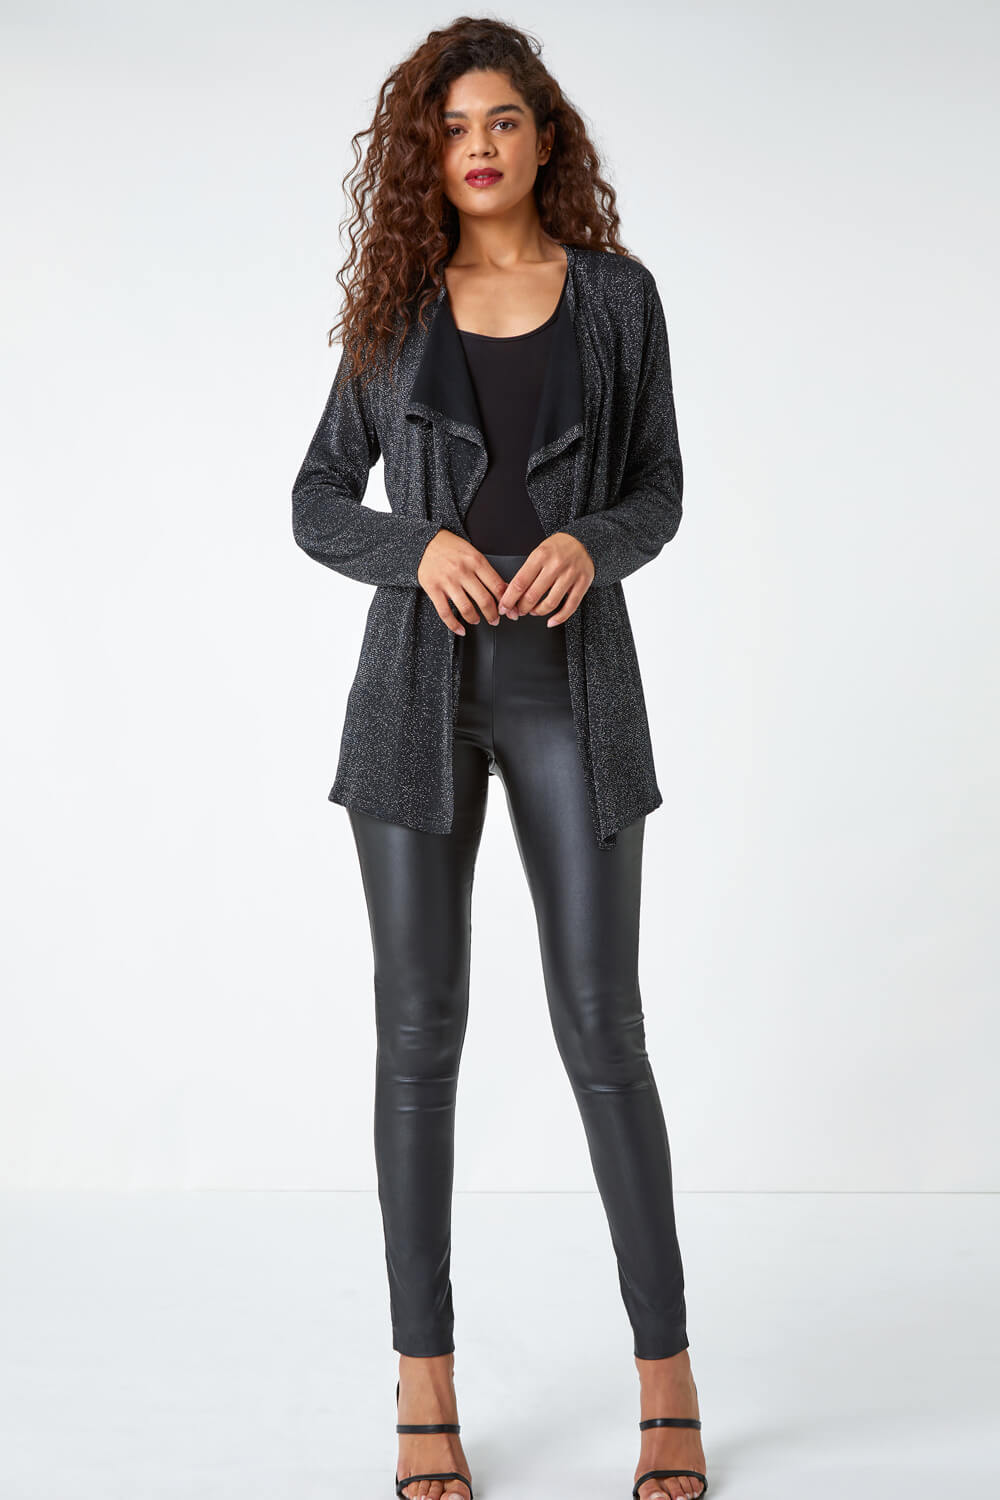 Black Shimmer Waterfall Stretch Cardigan, Image 4 of 5